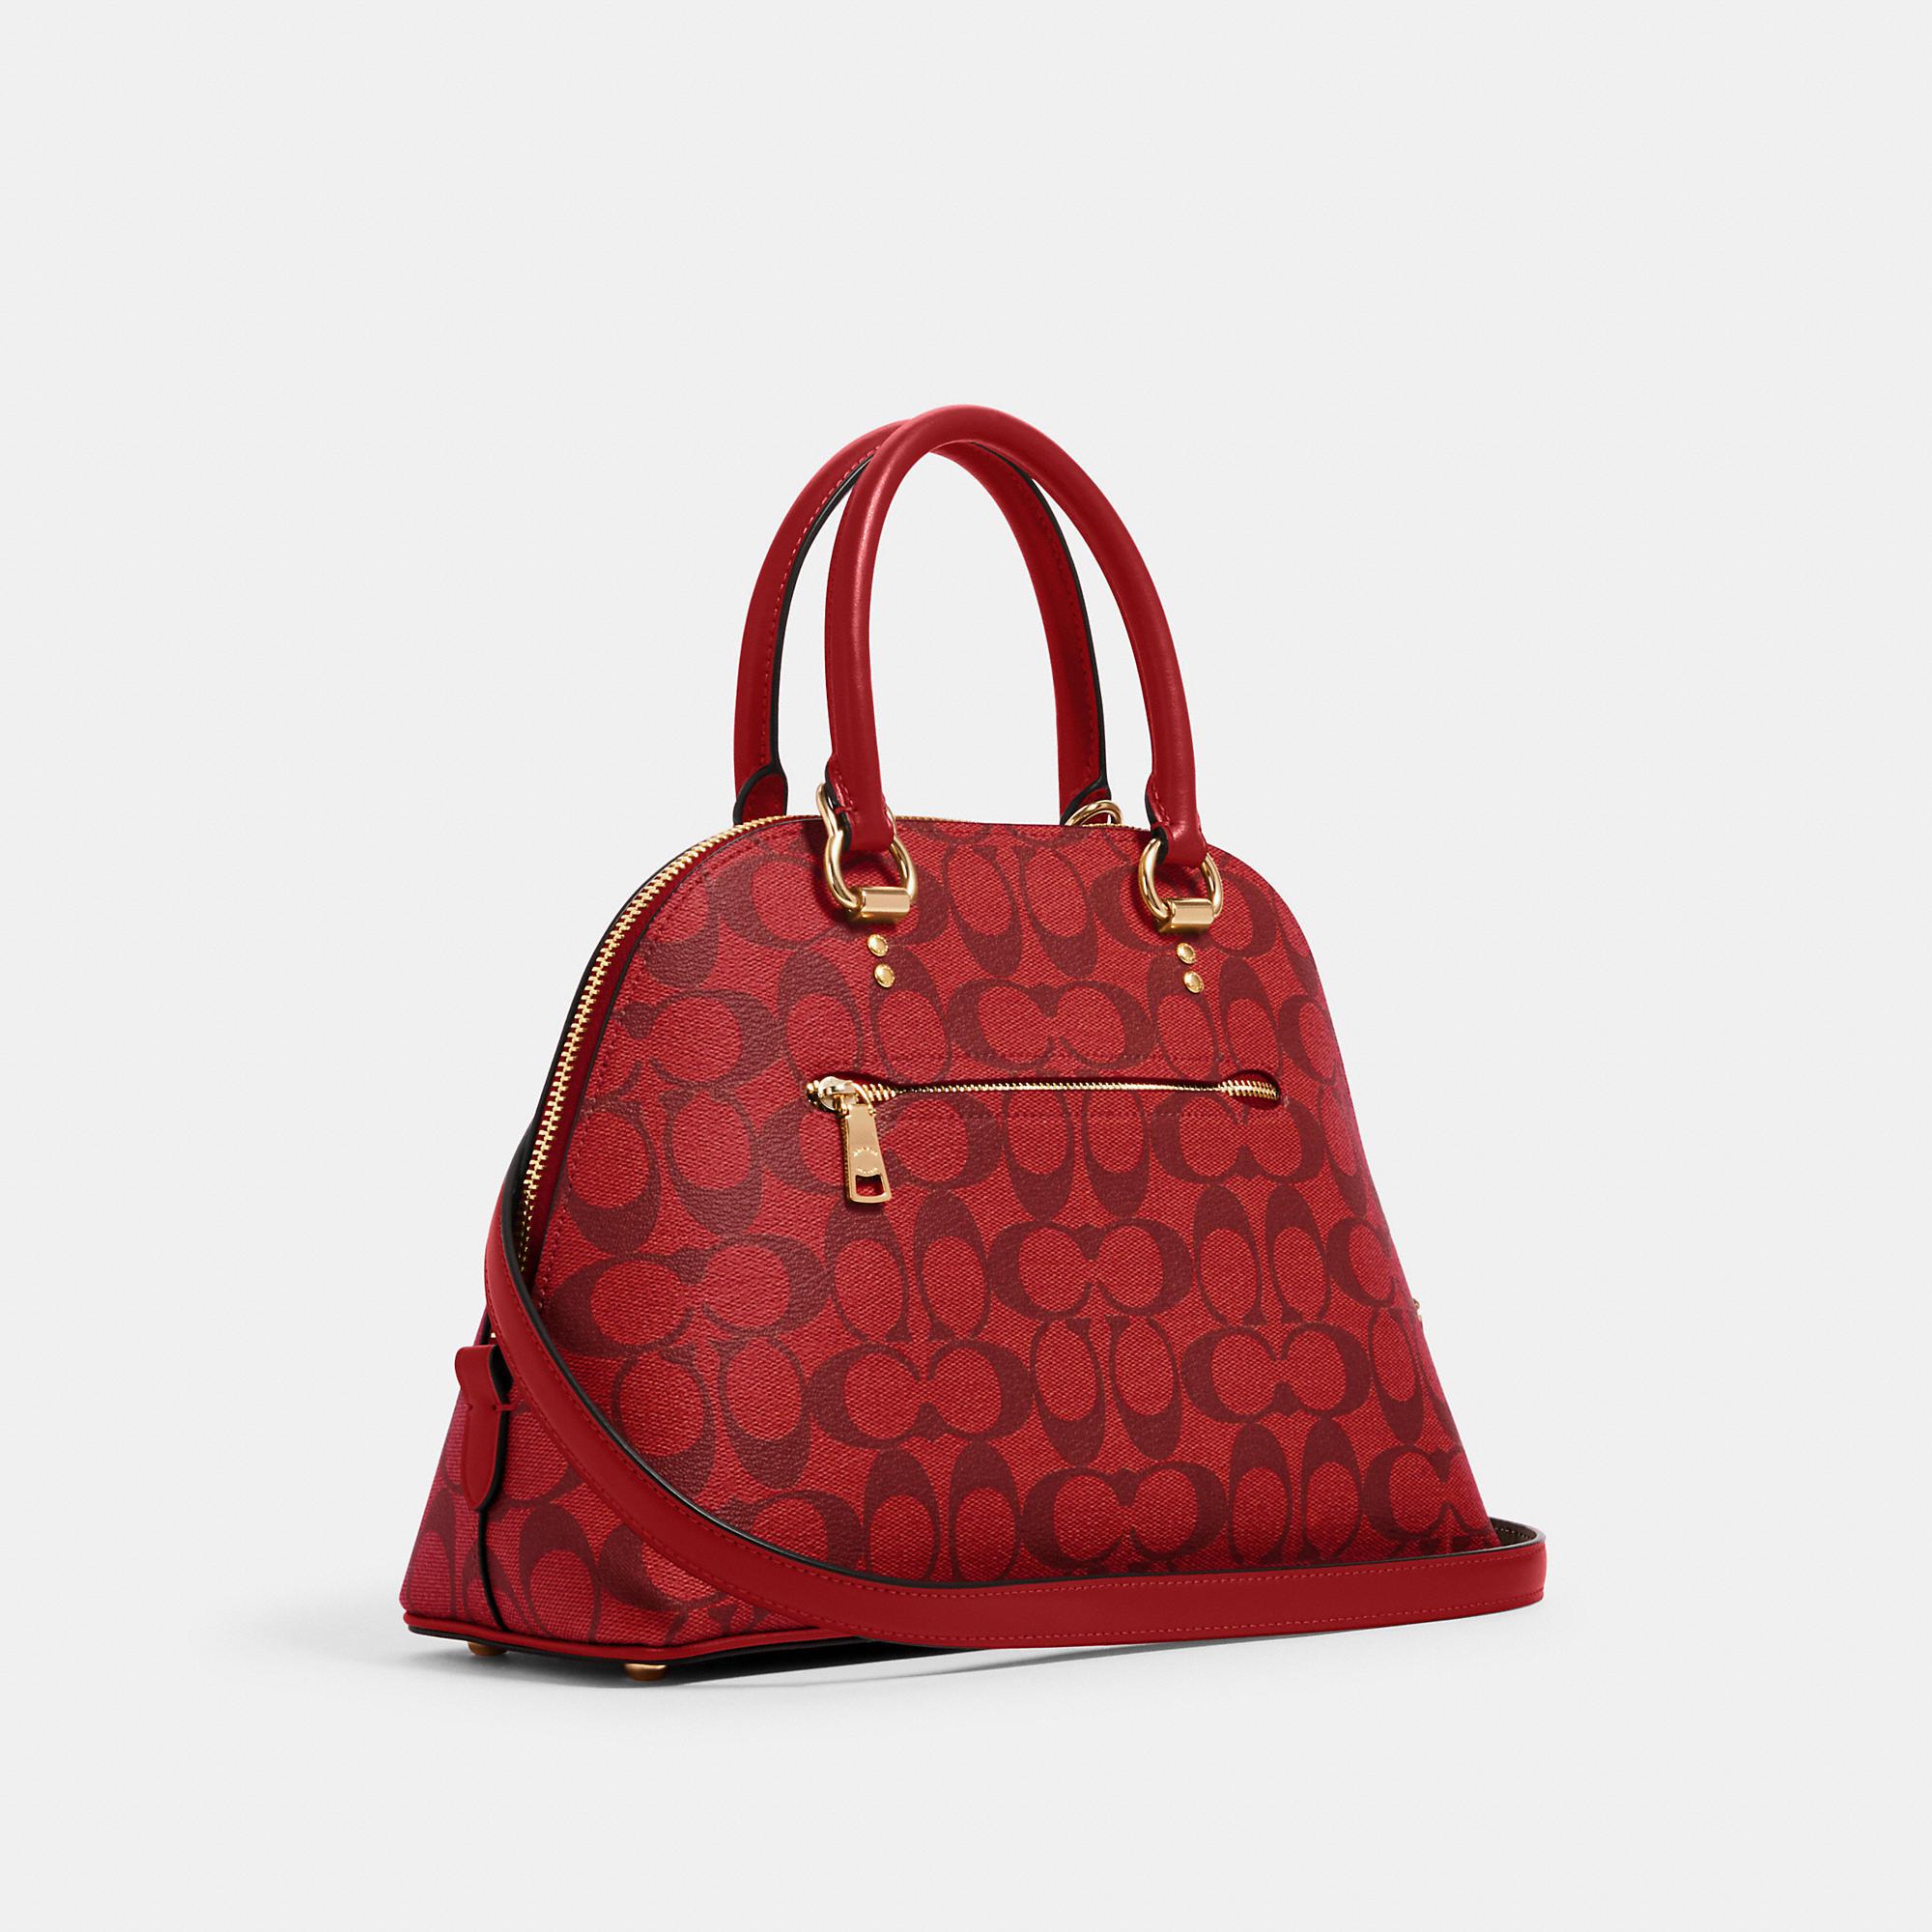 Coach Katy Satchel in Signature Canvas Brown/Red 